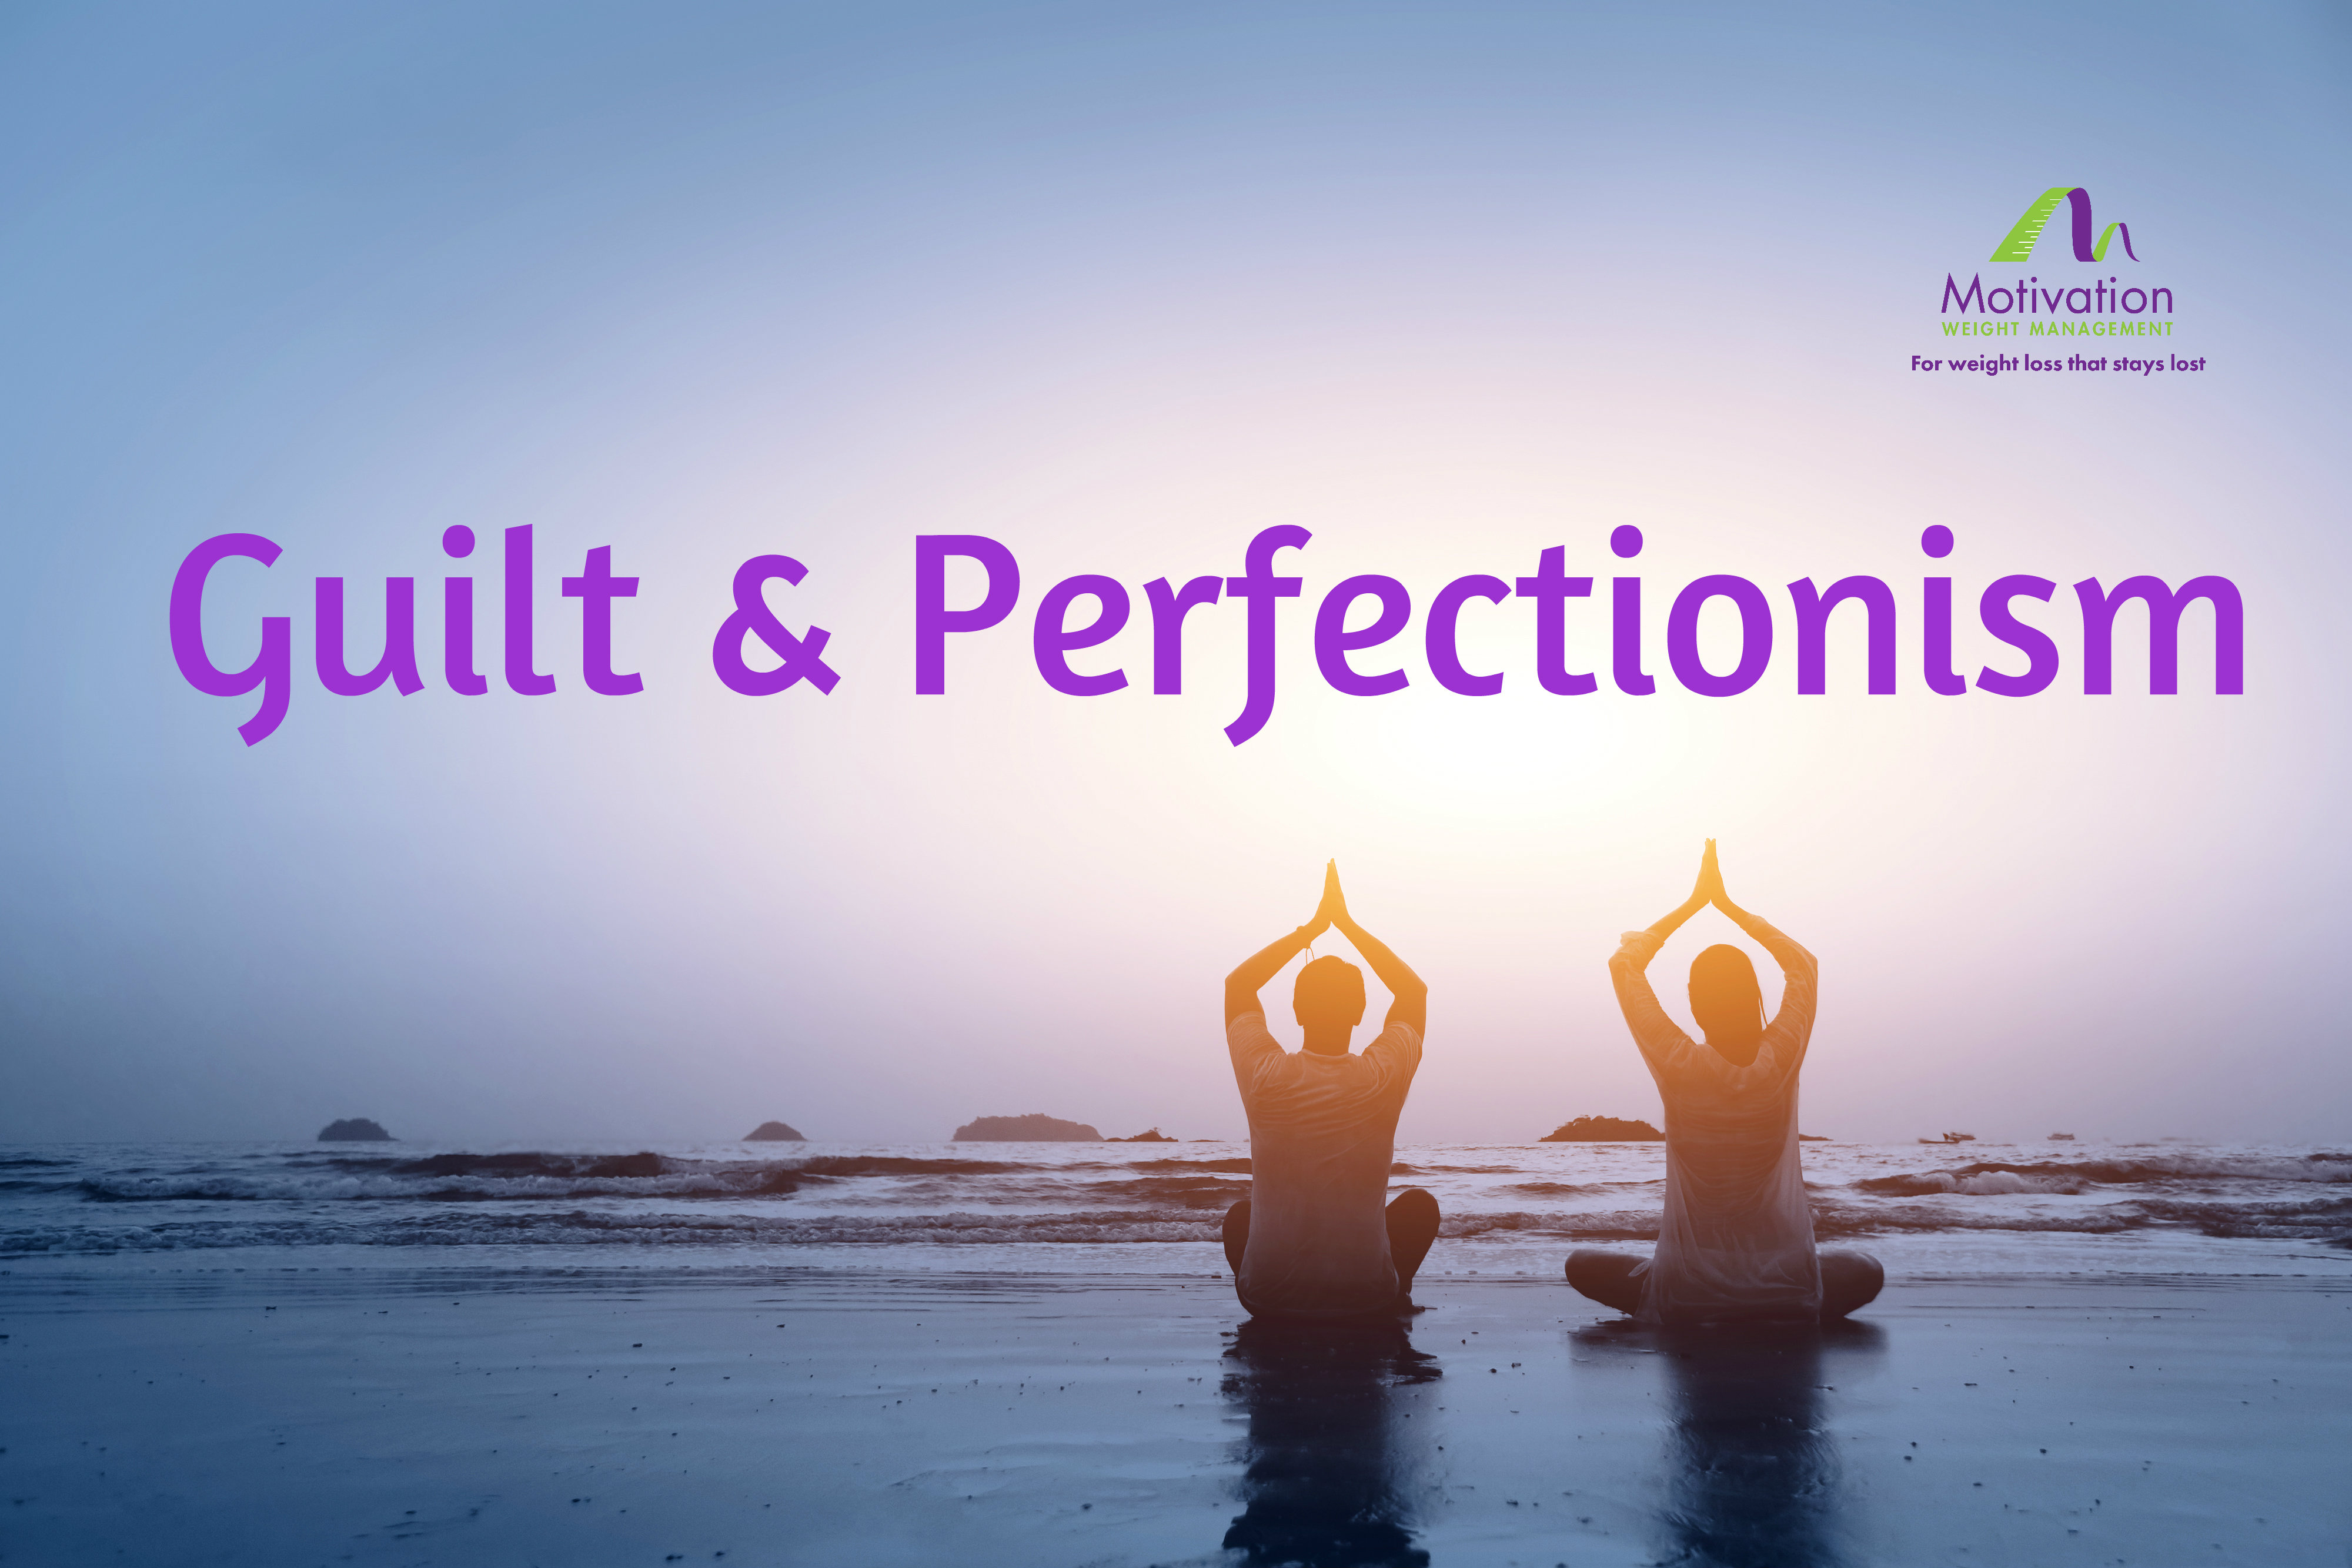 Day 4 Guilt & Perfectionism